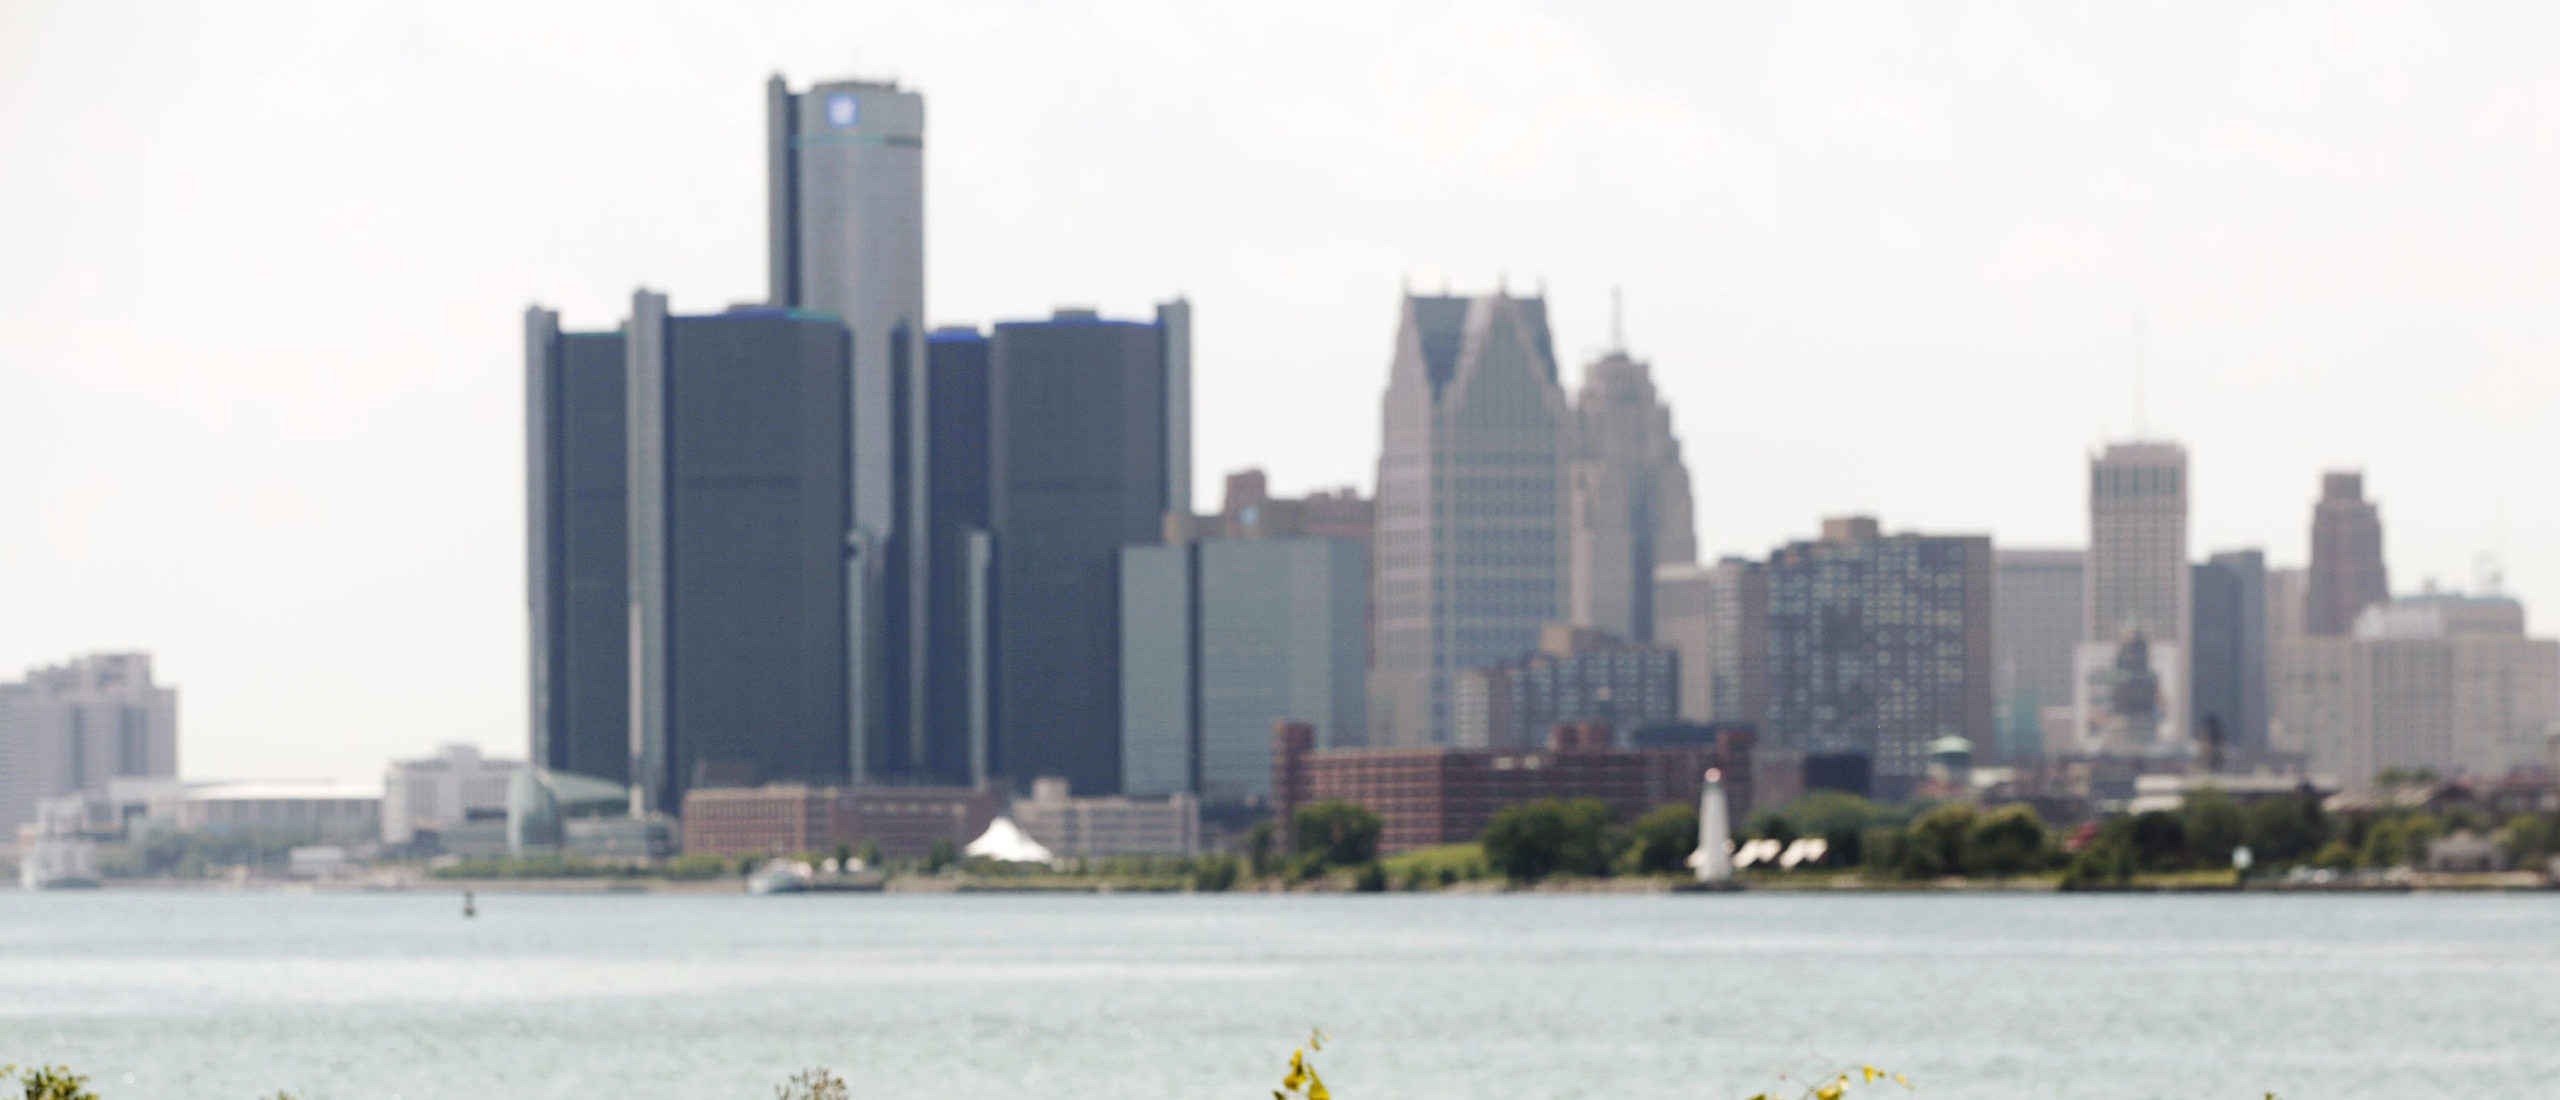 Detroit's skyline from Belle Isle in the Detroit River, with General Motors' world headquarters in the foreground. (Bill Pugliano/Getty Images)